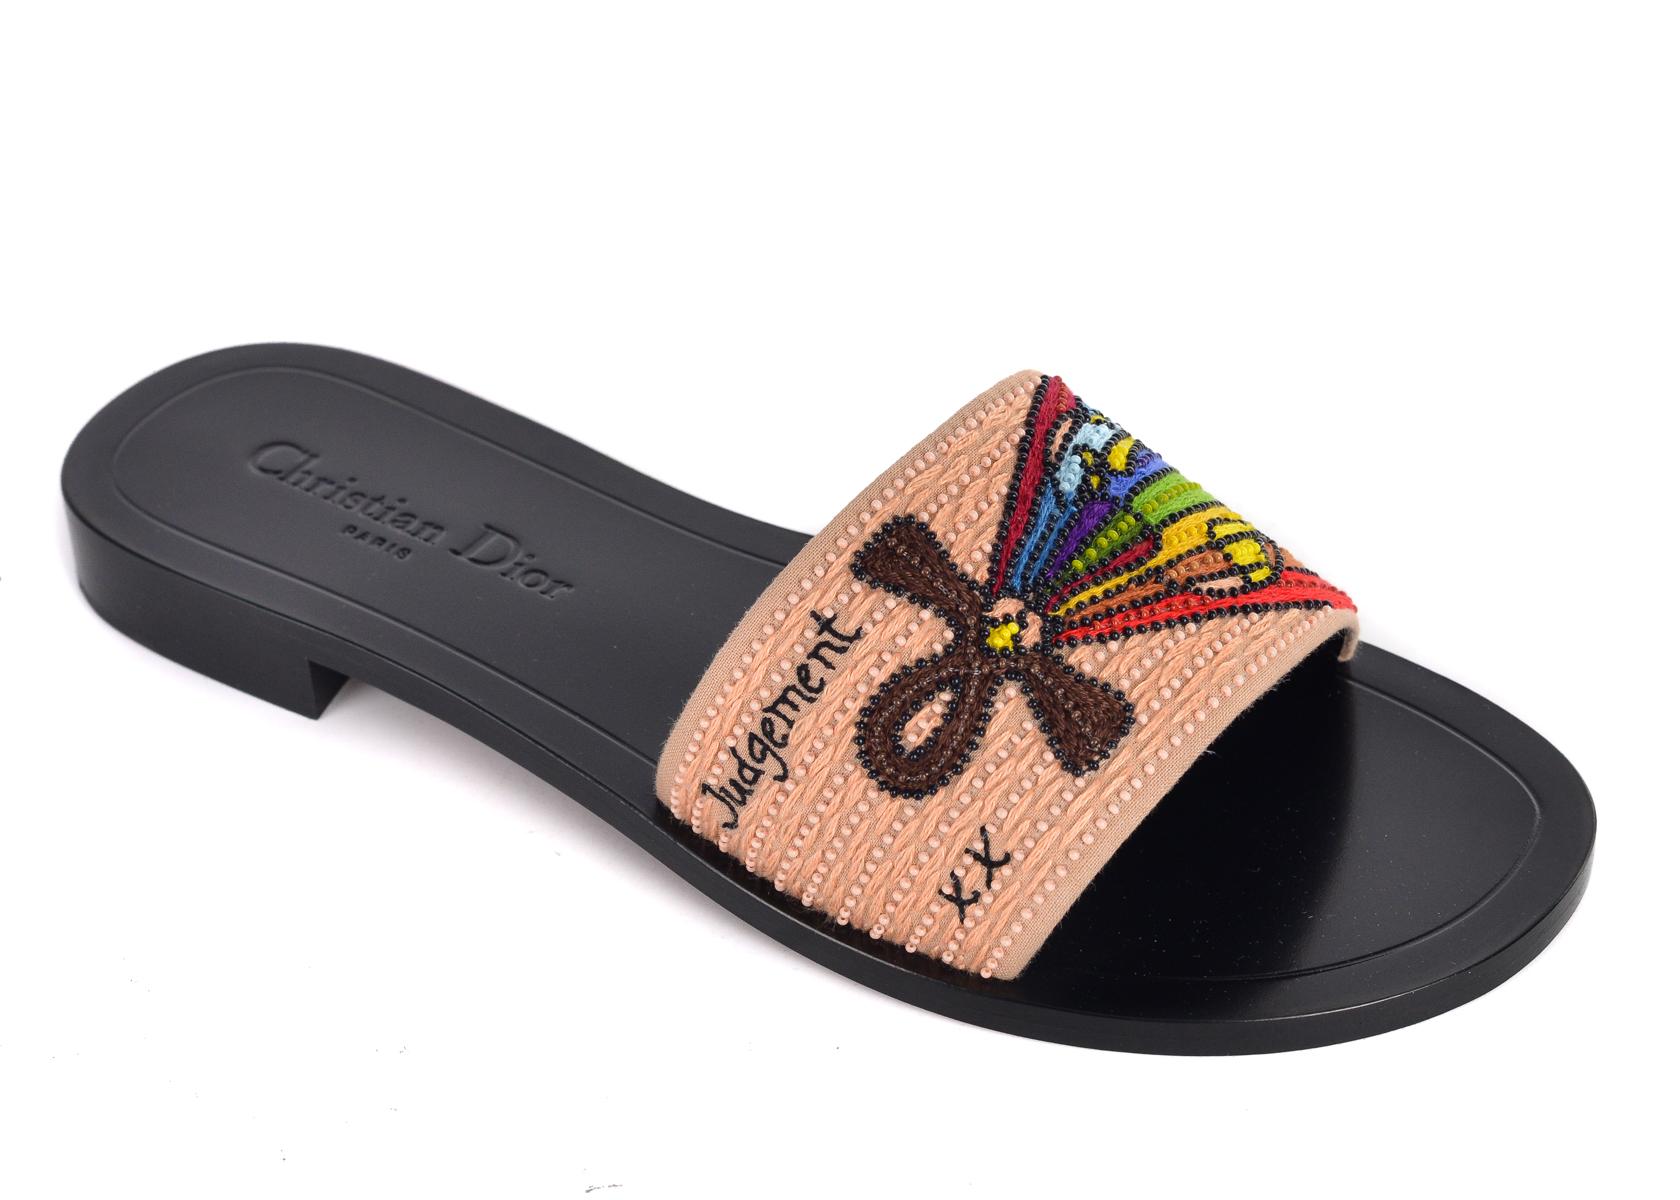 Christian Dior's Dior Tarot Judgement Embroidered Slippers. These slippers are crafted with intricate embroidered designs for a chic edgy look. Pair with regular denims for those slipper clogs for a chic everyday look.

Christian Dior's Dior